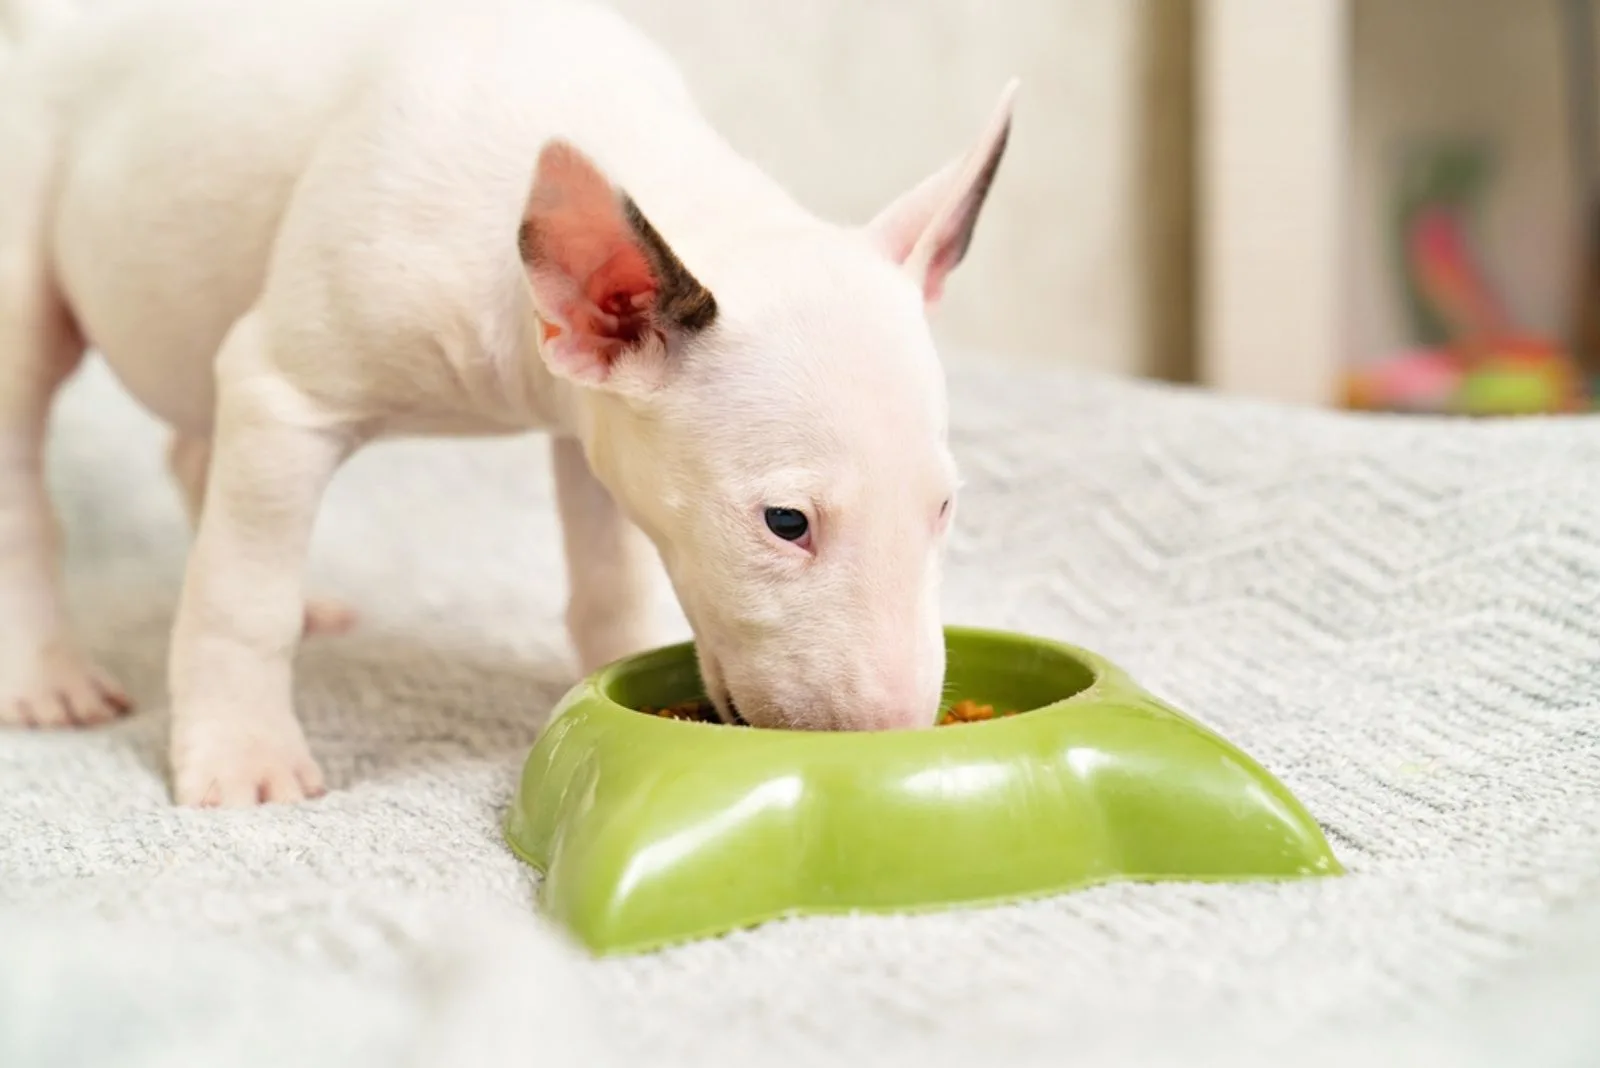 bull terrier eats from a bowl